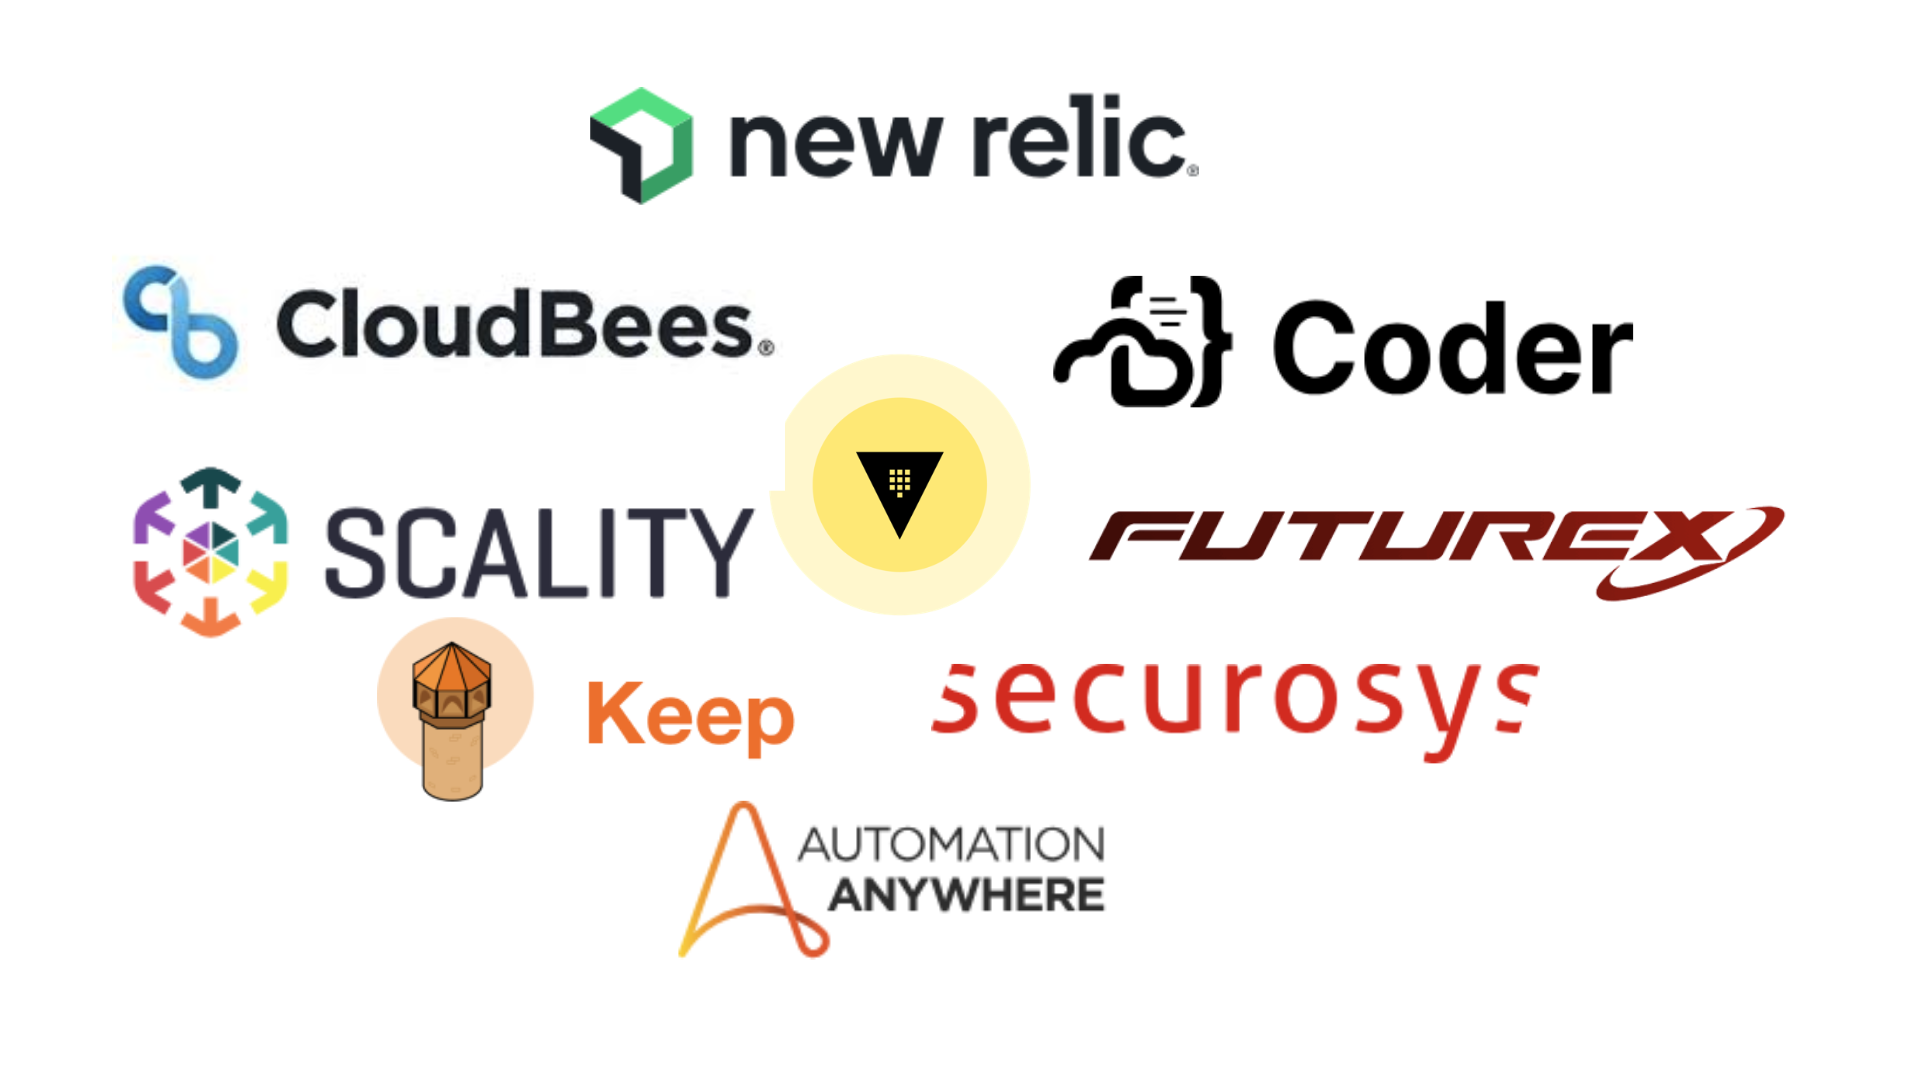 Vault integrations with New Relic, Cloudbees, Coder, and more continue to strengthen customer security